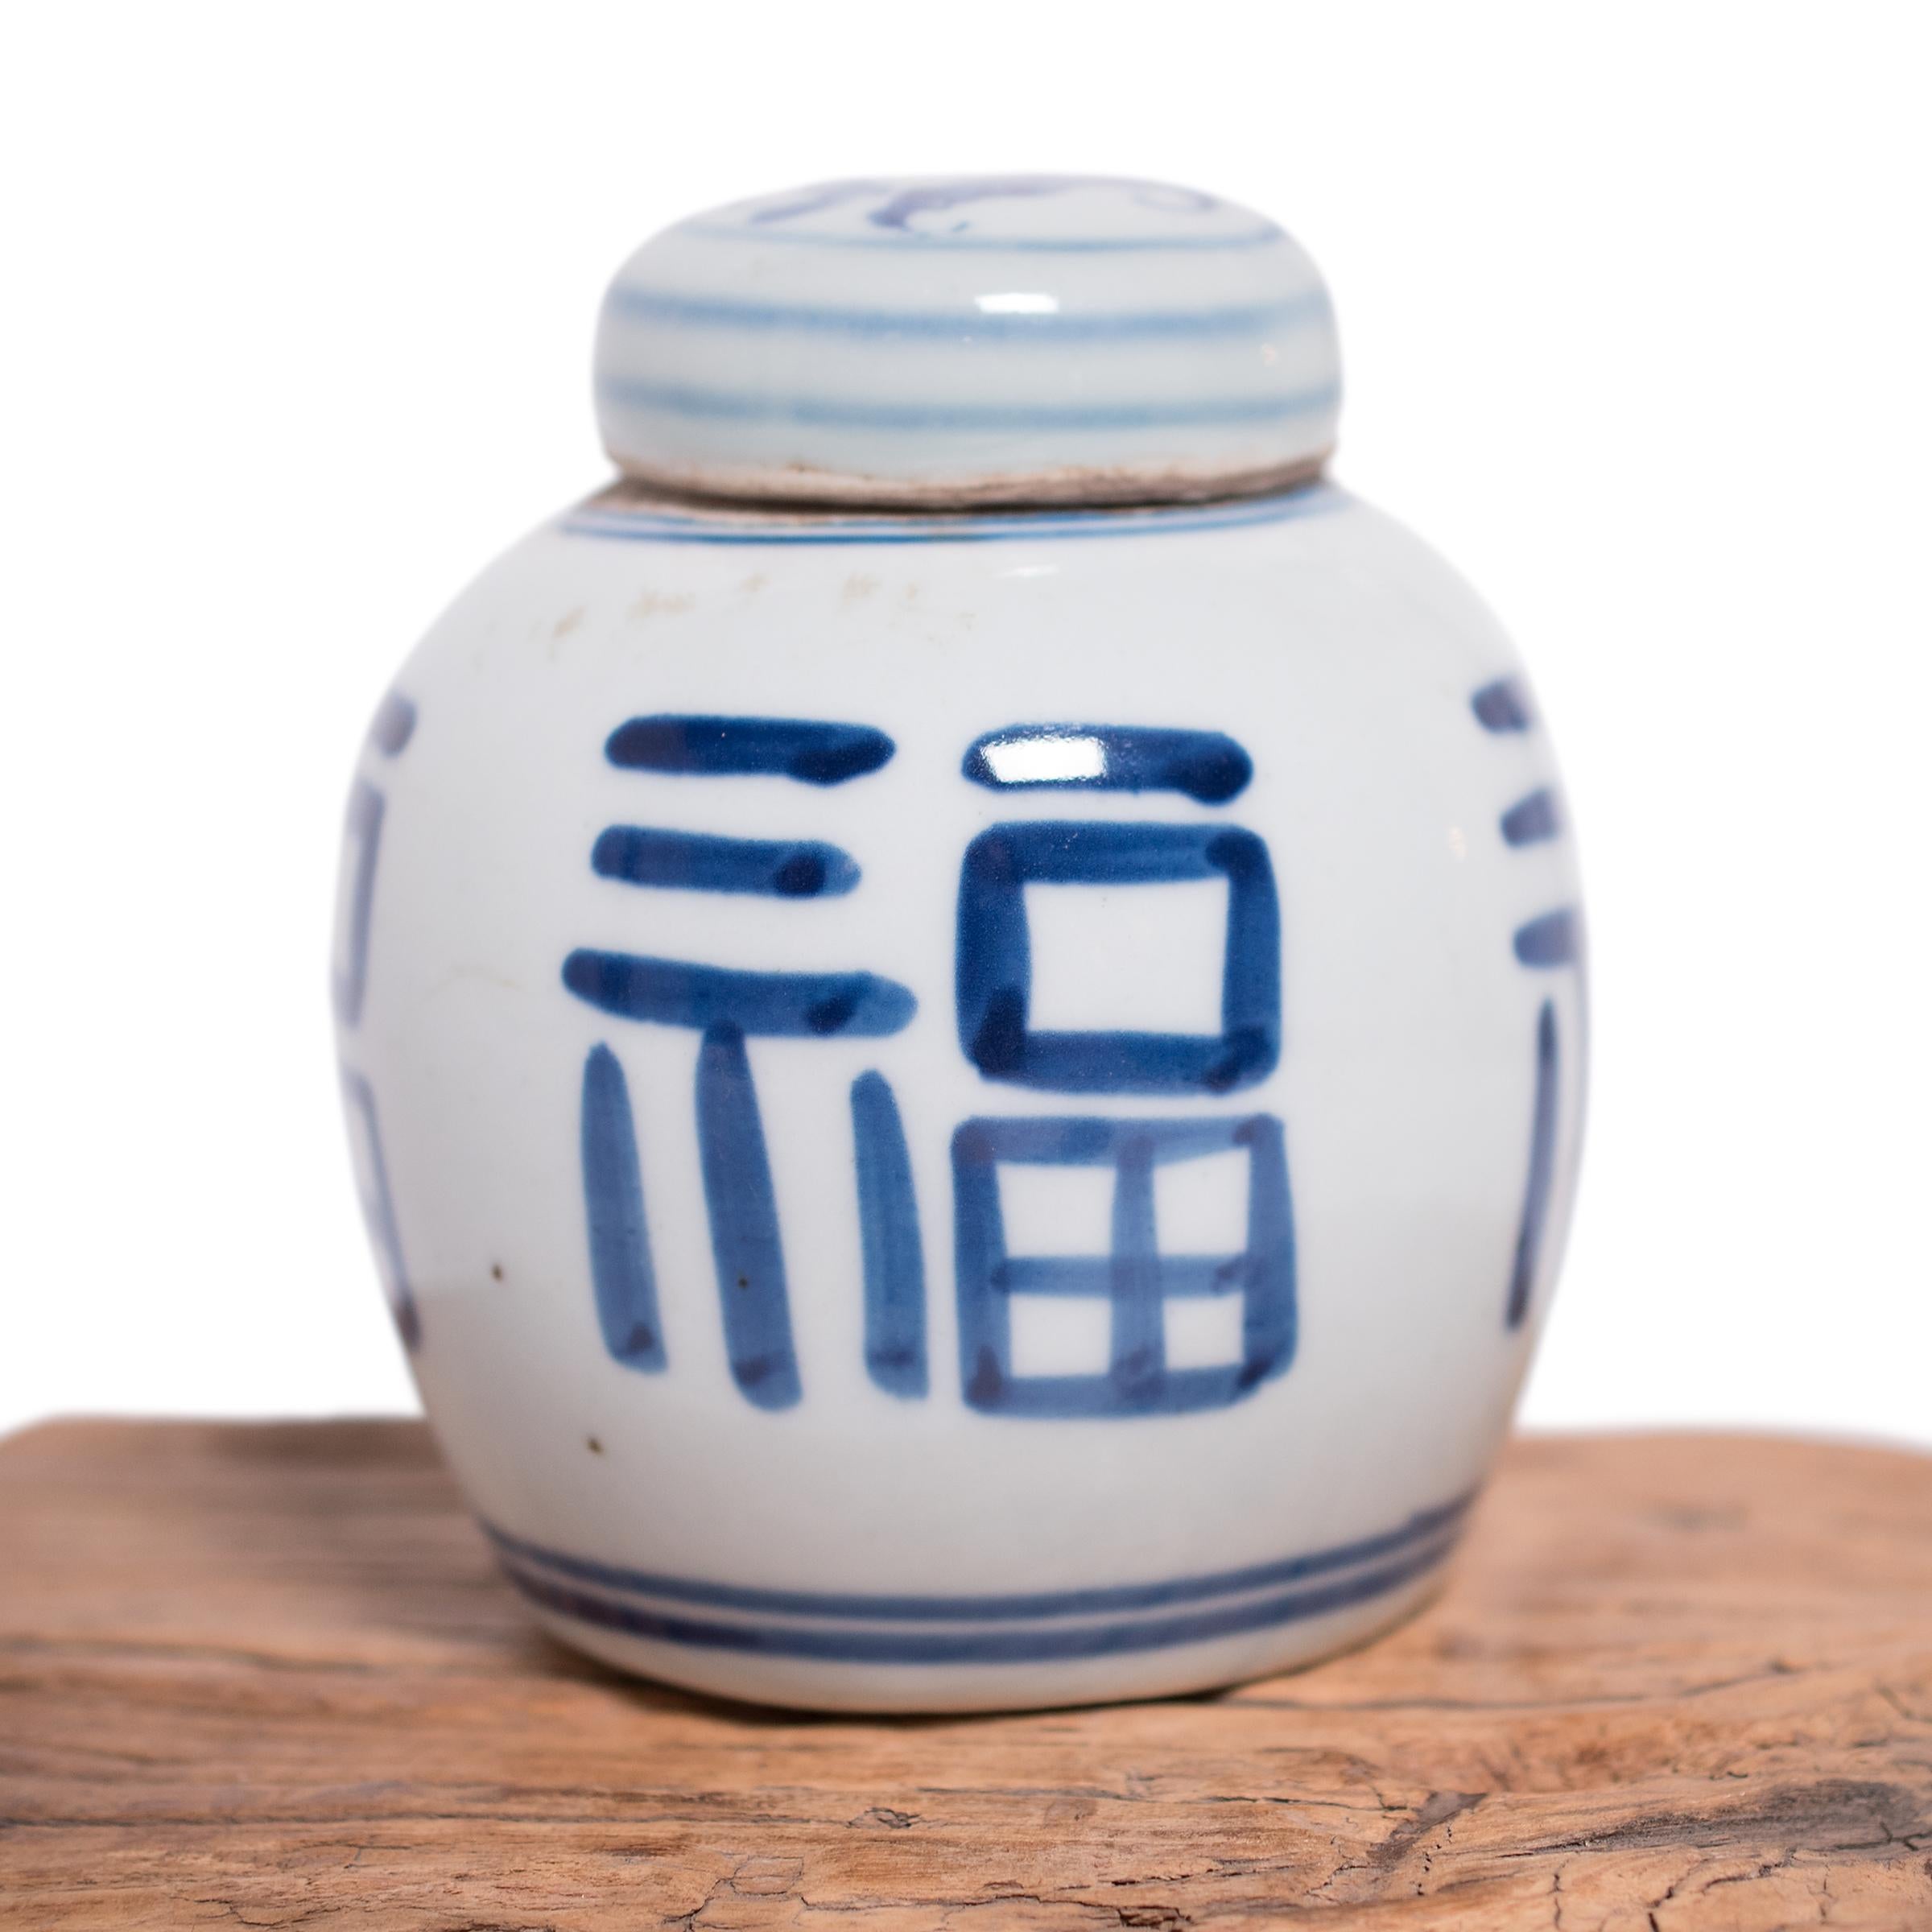 Porcelain Petite Chinese Blue and White Prosperity Jar